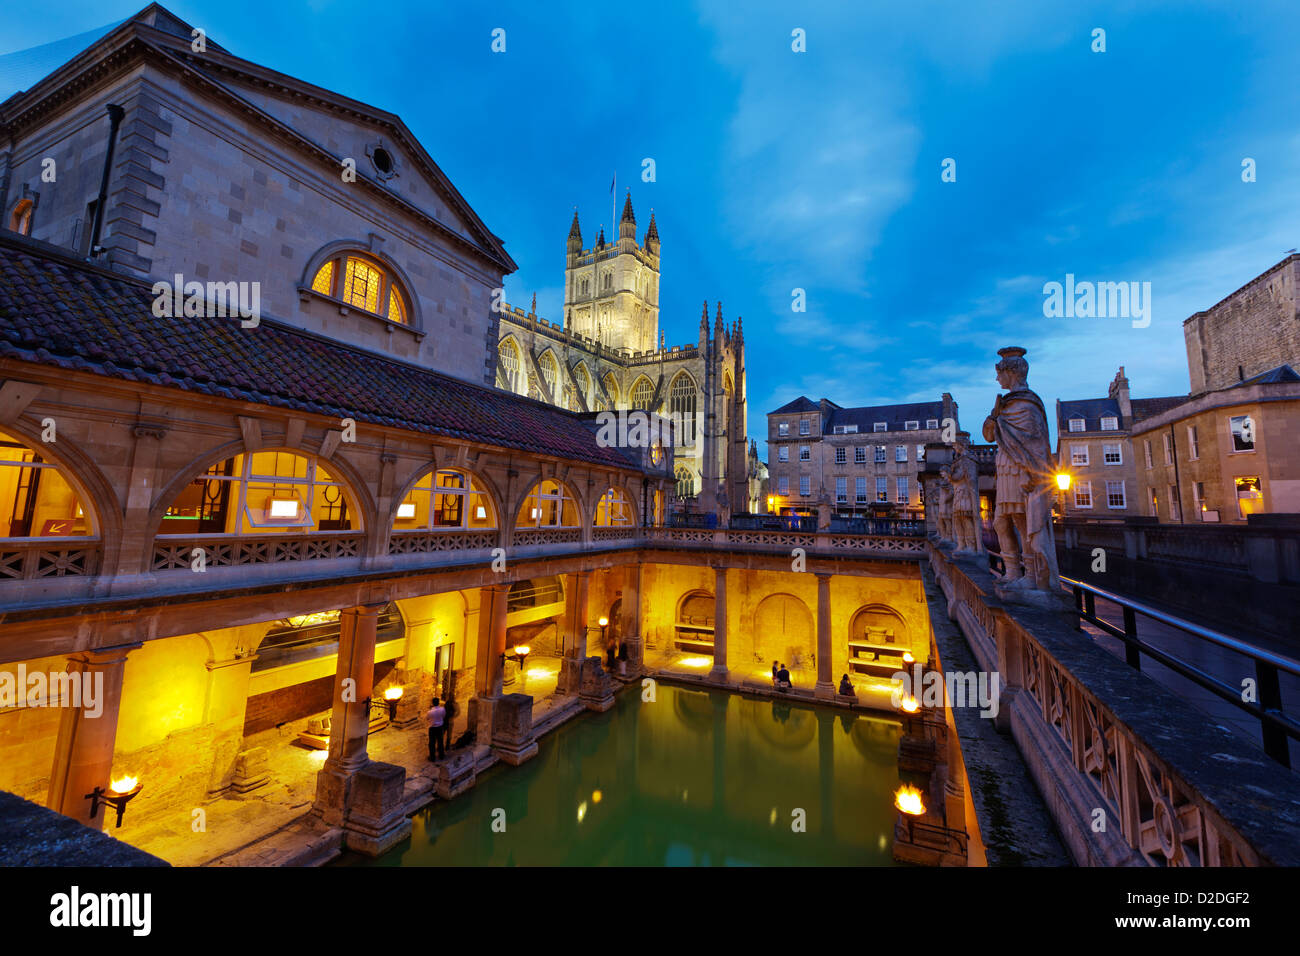 Roman Bath and Bath Abbey at night, Bath, UK. Motion blur on visitors due to long exposure. Stock Photo